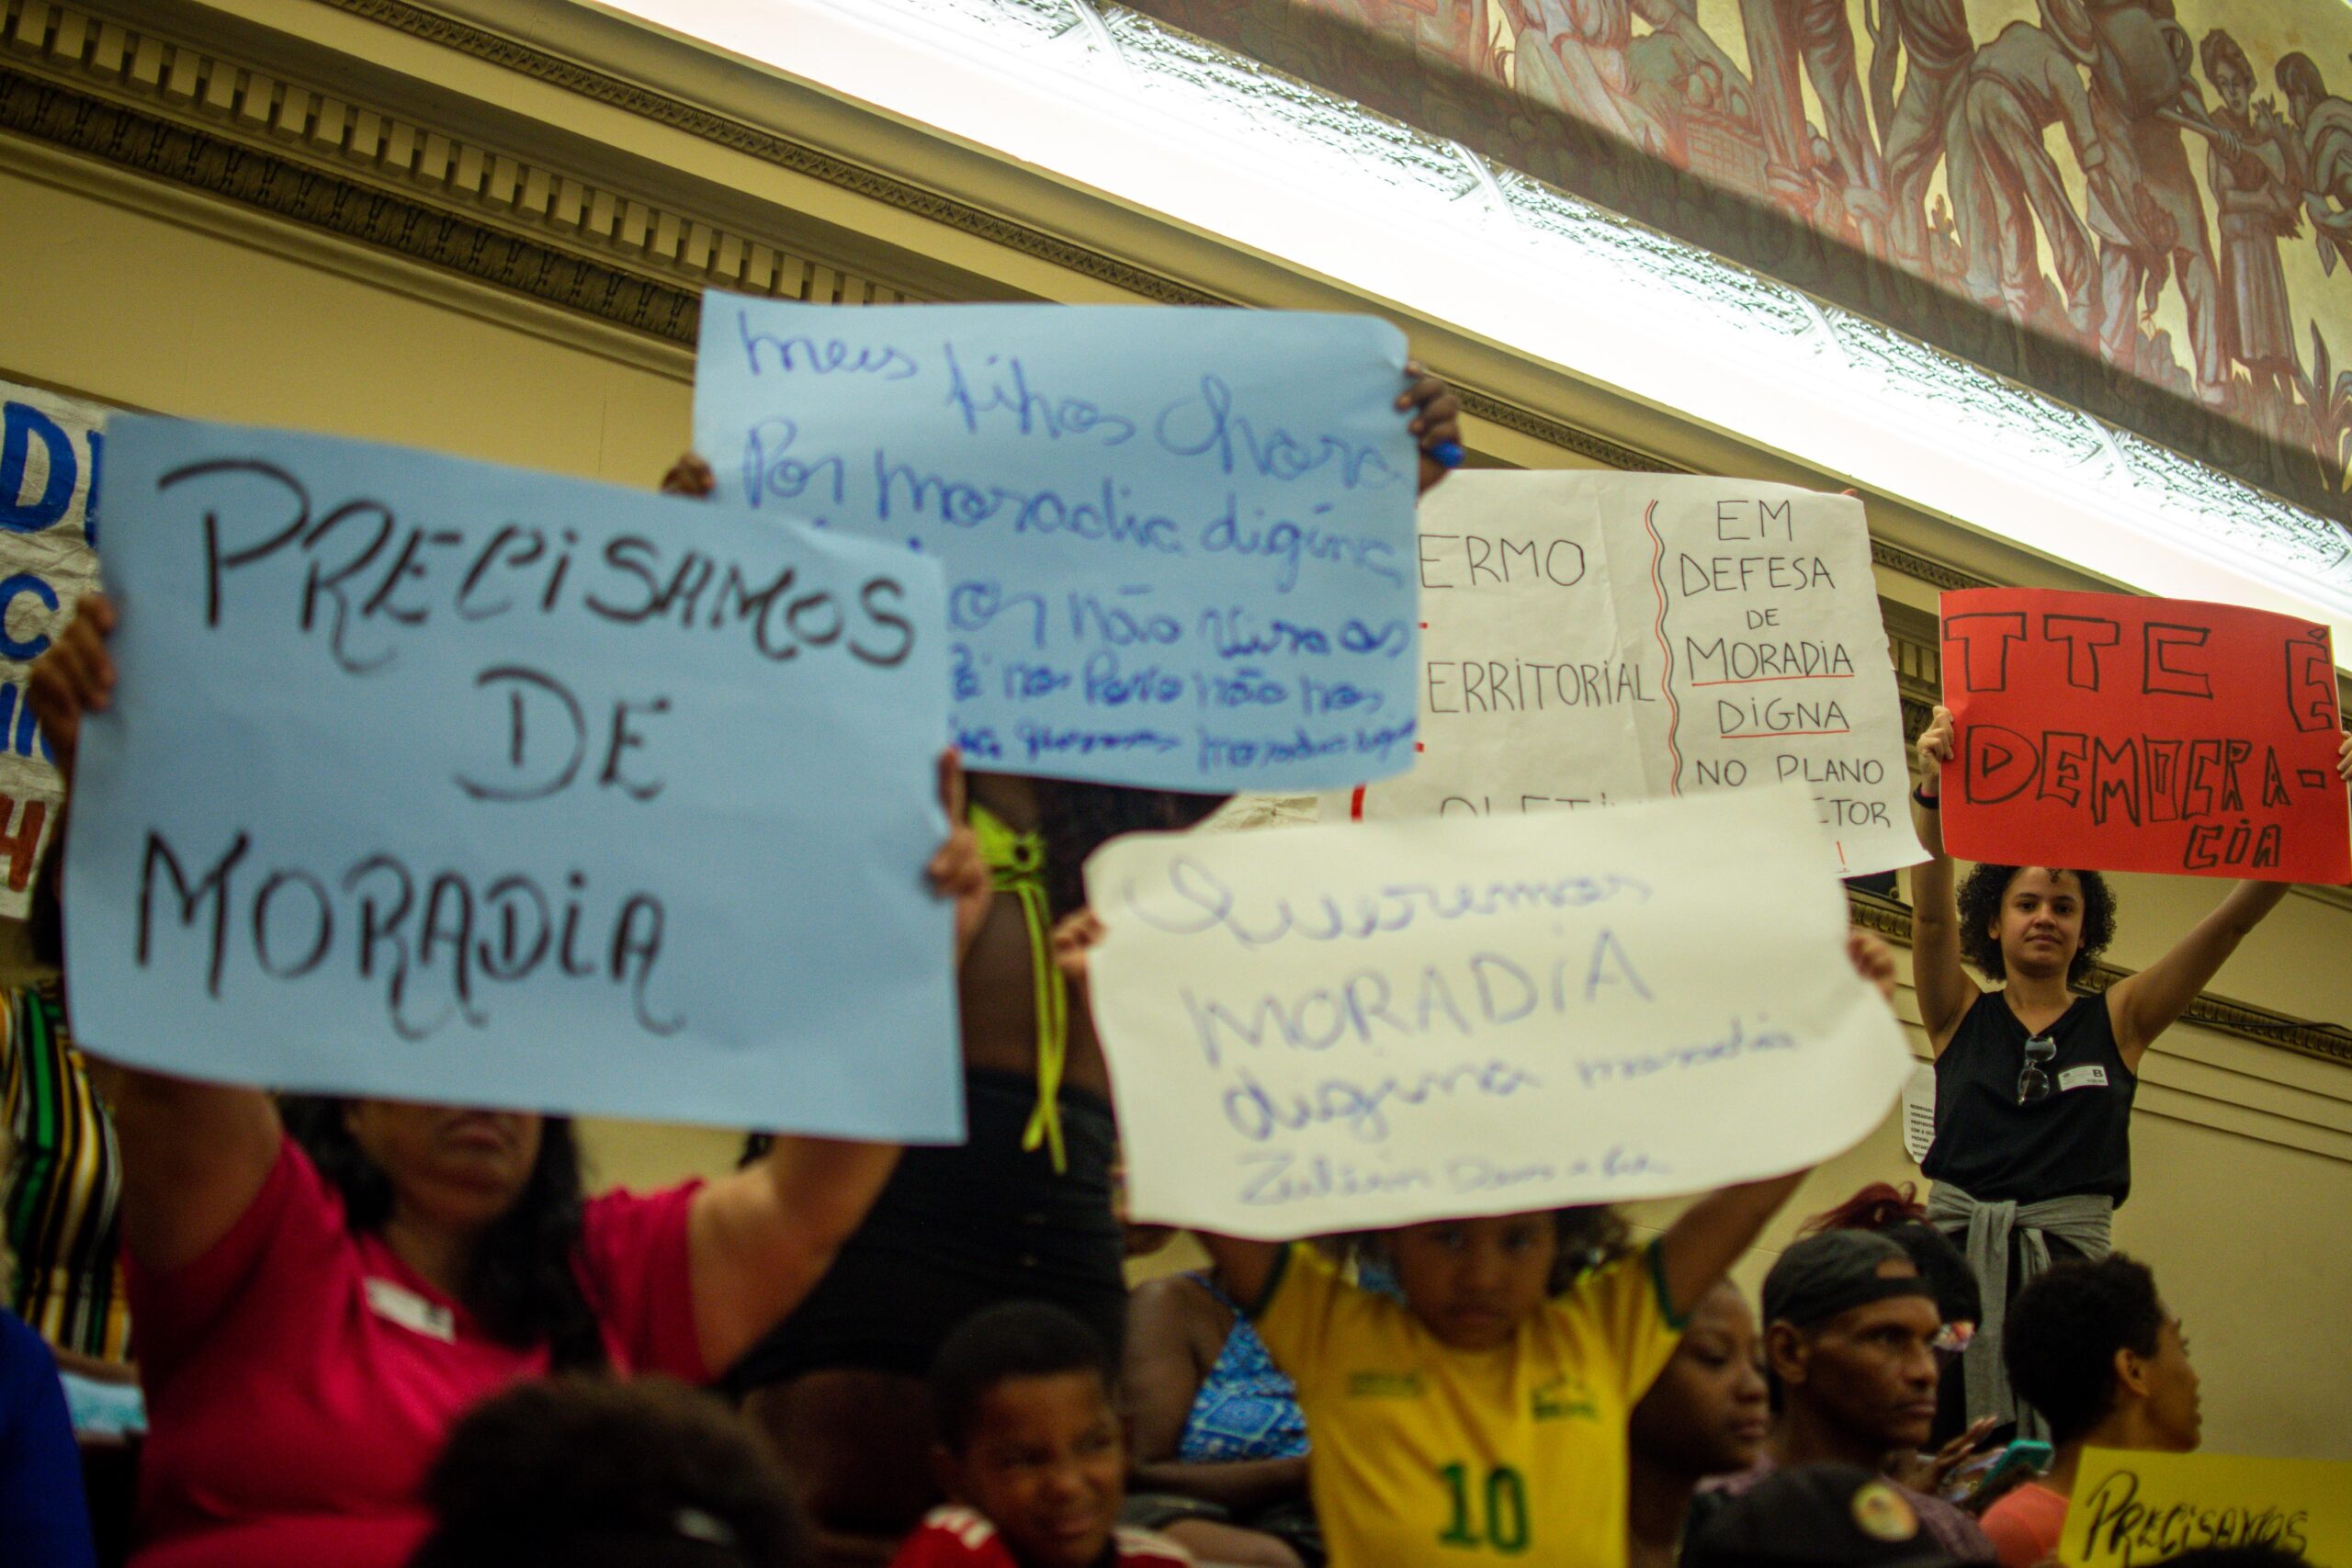 People at the Master Plan Public Hearing at Rio City Council Chambers on April 5, 2023 holding signs calling for decent housing and supporting the Favela Community Land Trust (F-CLT)